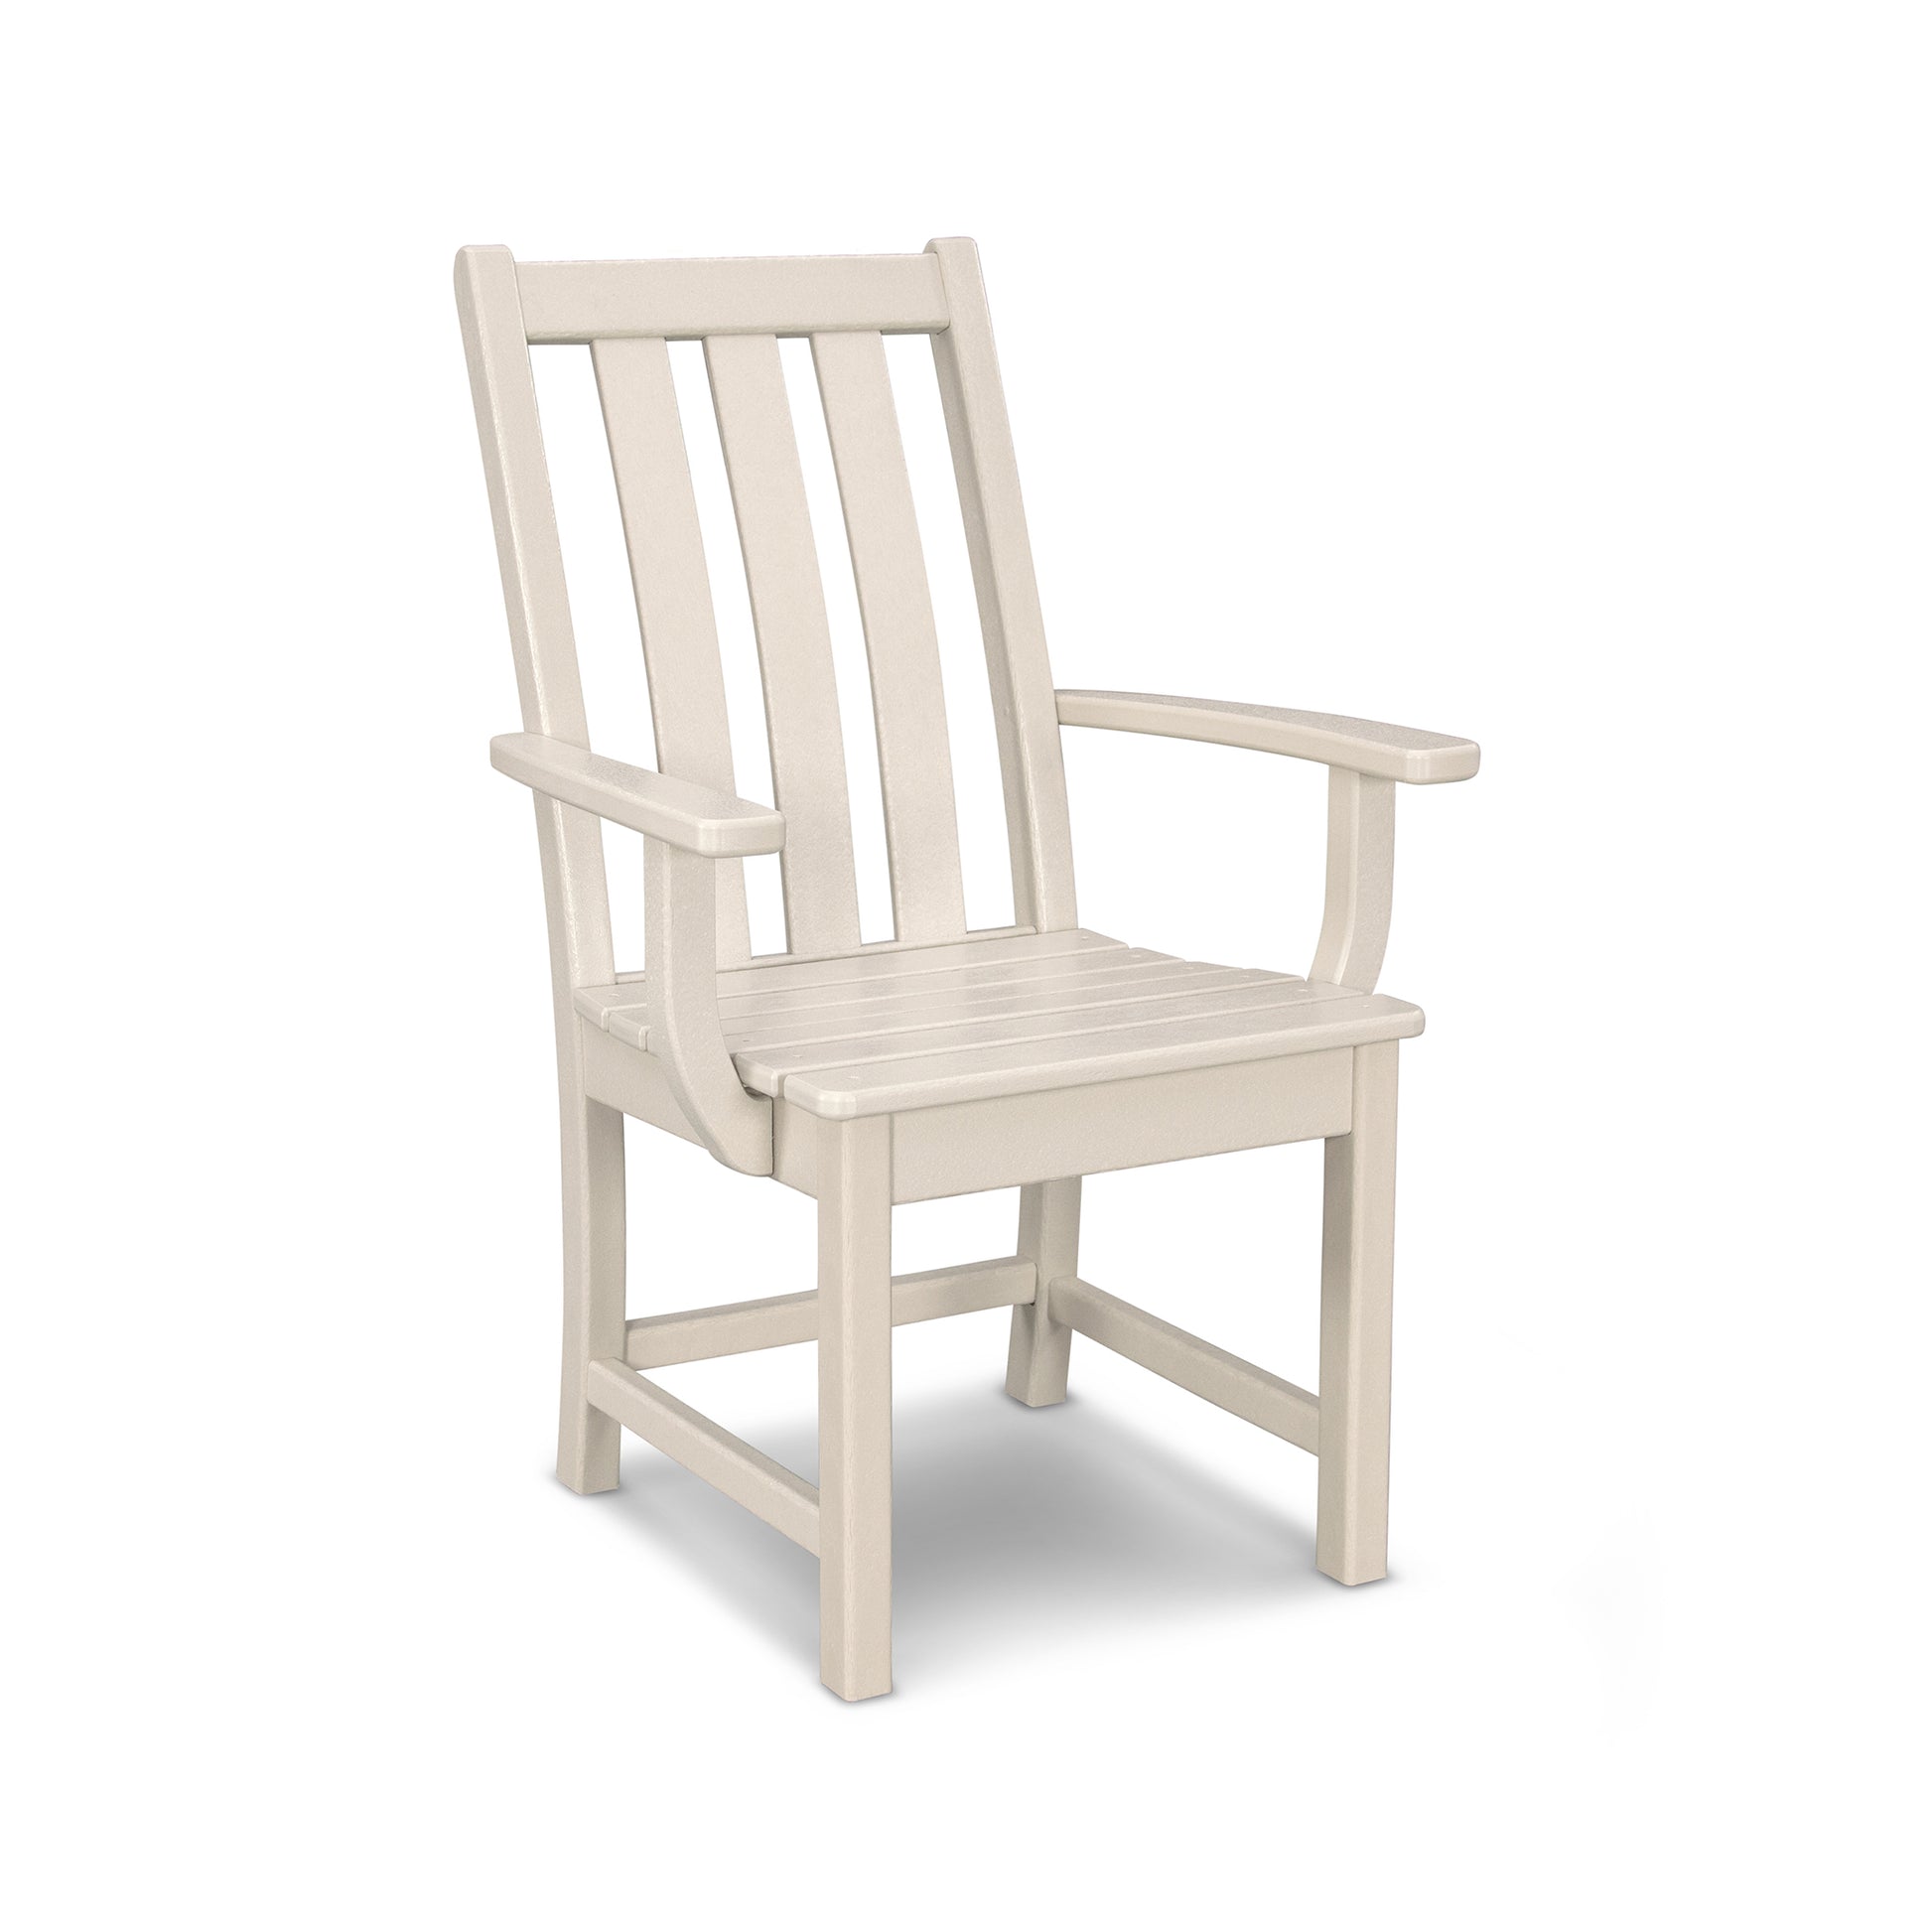 A beige, POLYWOOD® Vineyard Dining Arm Chair adirondack chair with a high back and armrests, isolated on a white background.